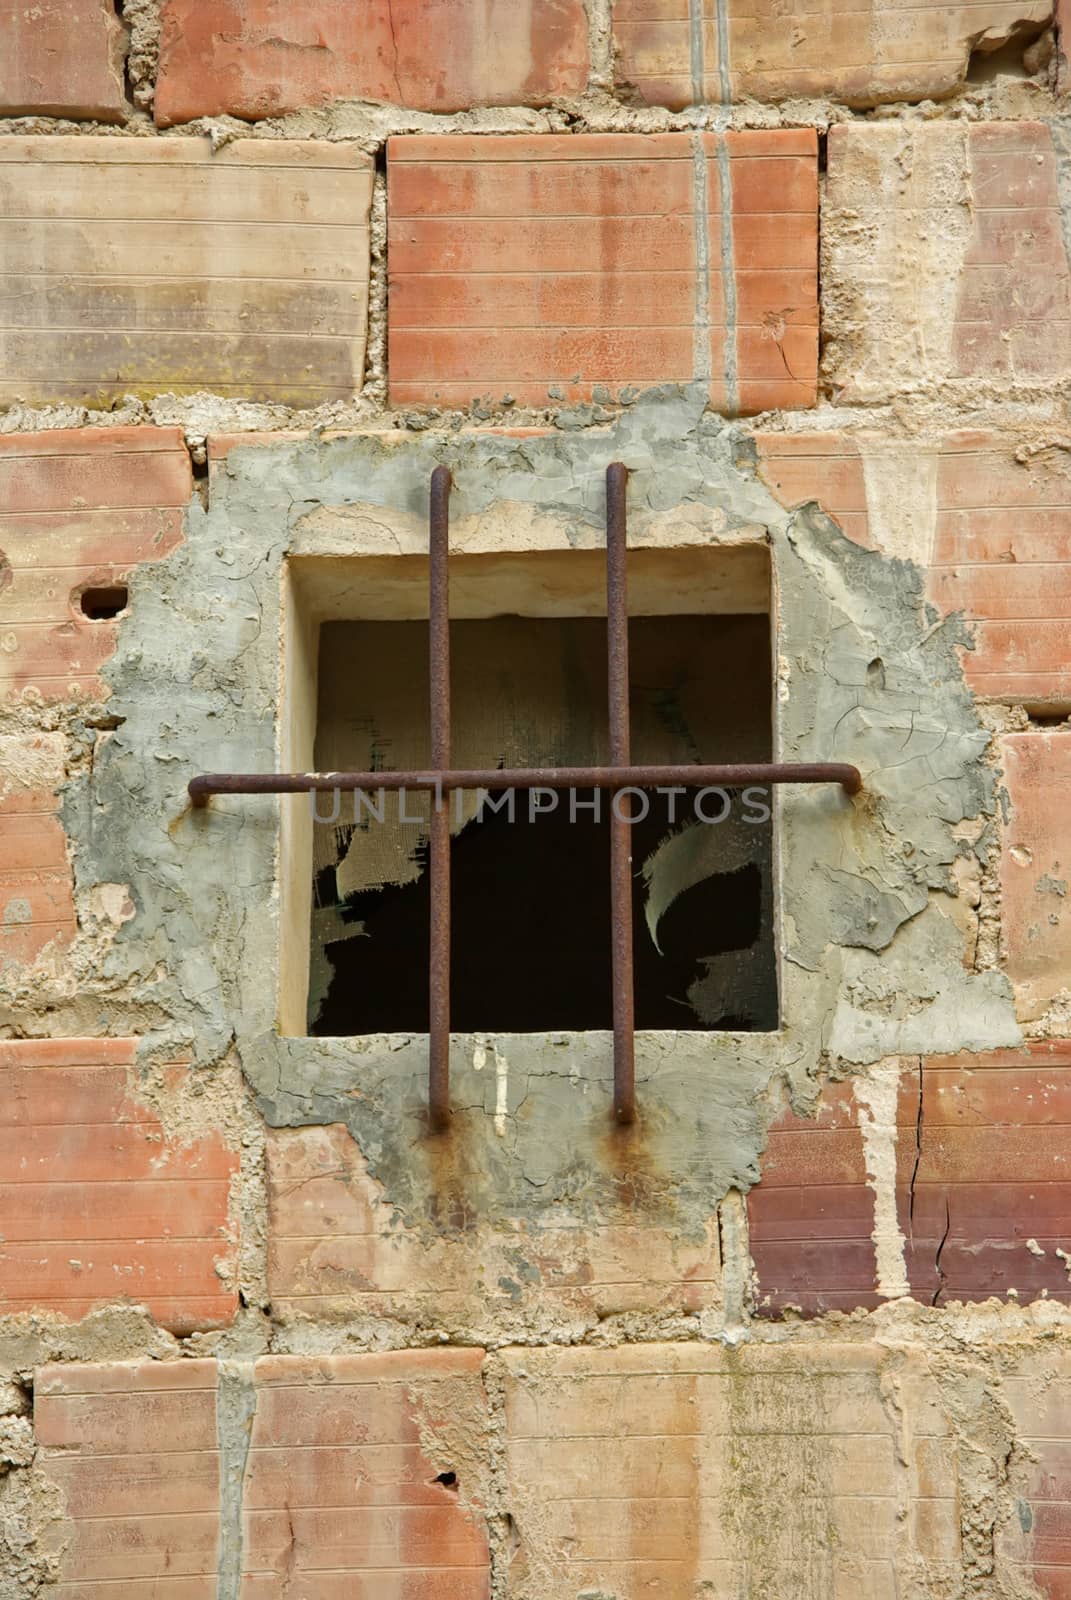 Old window in a brick wall protected with a grid of iron bars